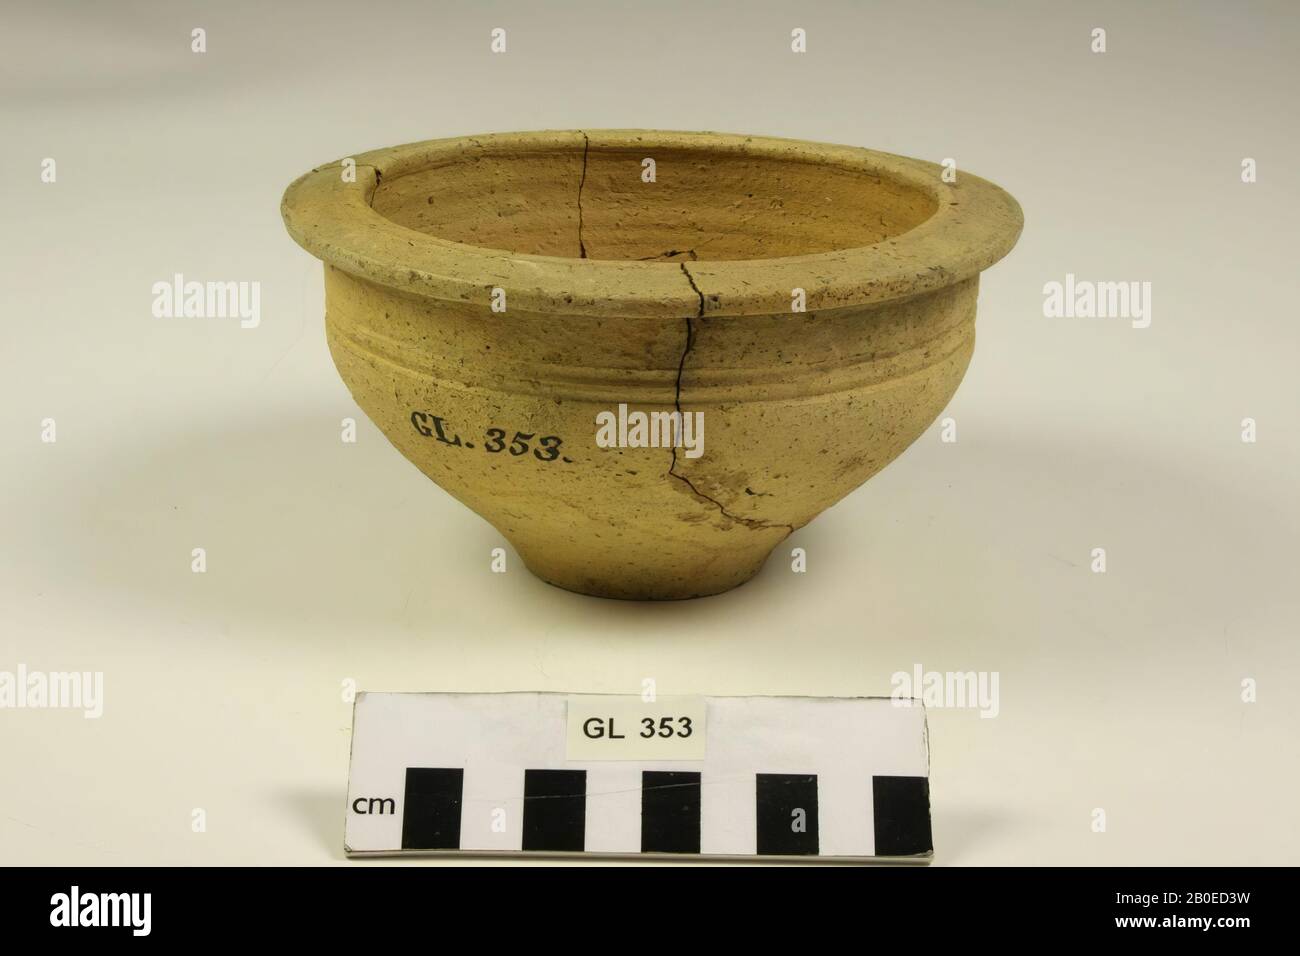 Bowl of rough-walled earthenware. With old glues which threaten to let go, bowl, pottery, h: 8.5 cm, diam: 15.4 cm, roman, Netherlands, Limburg, Roerdalen, St. Odiliënberg Stock Photo